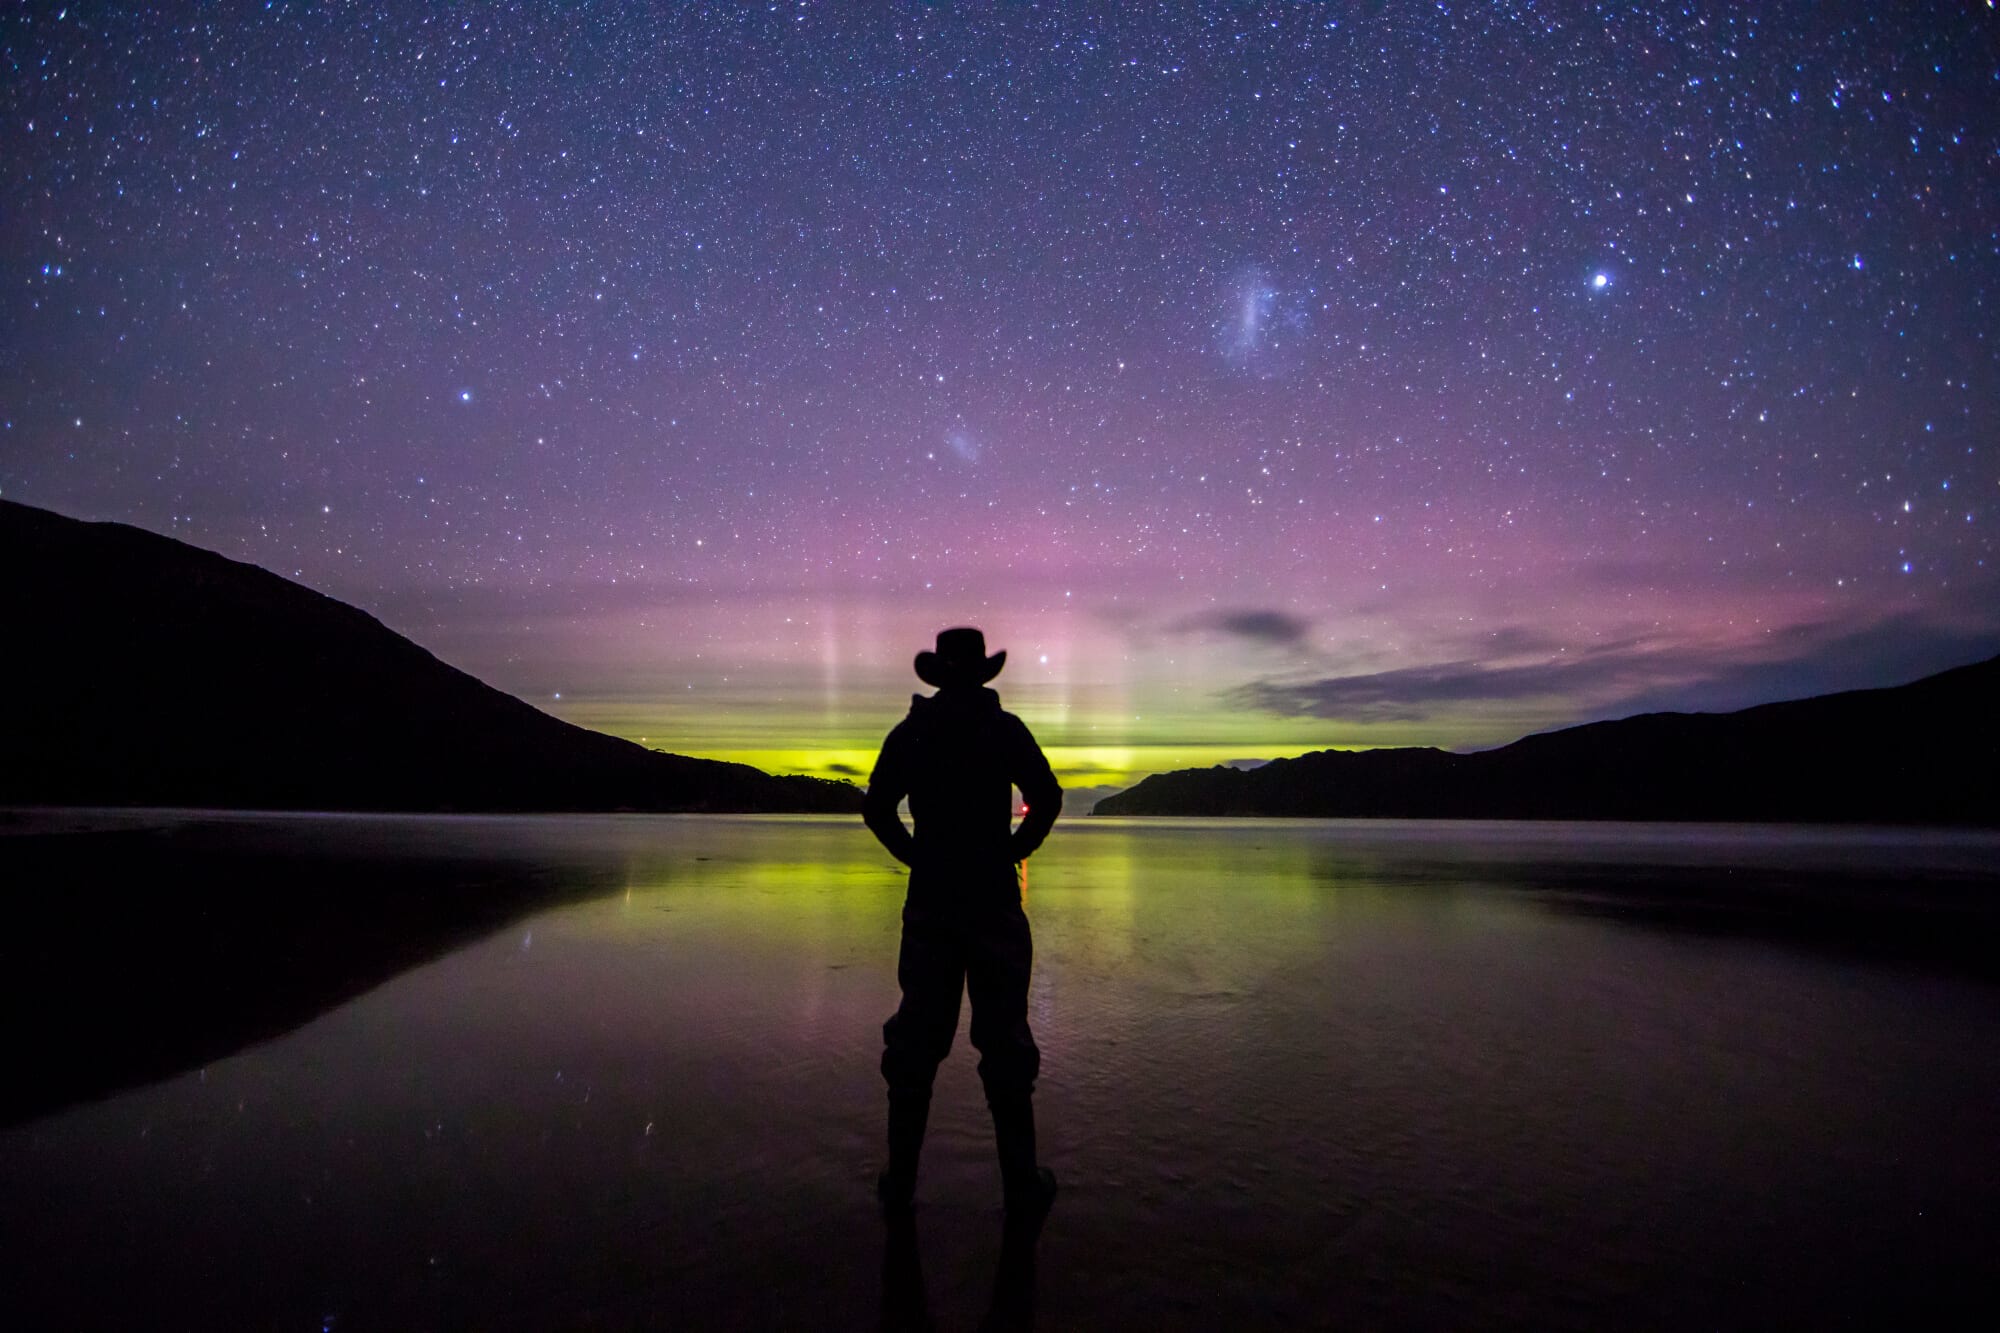 The Aurora Australis (southern lights) as seen from an adventure in southern Tasmania